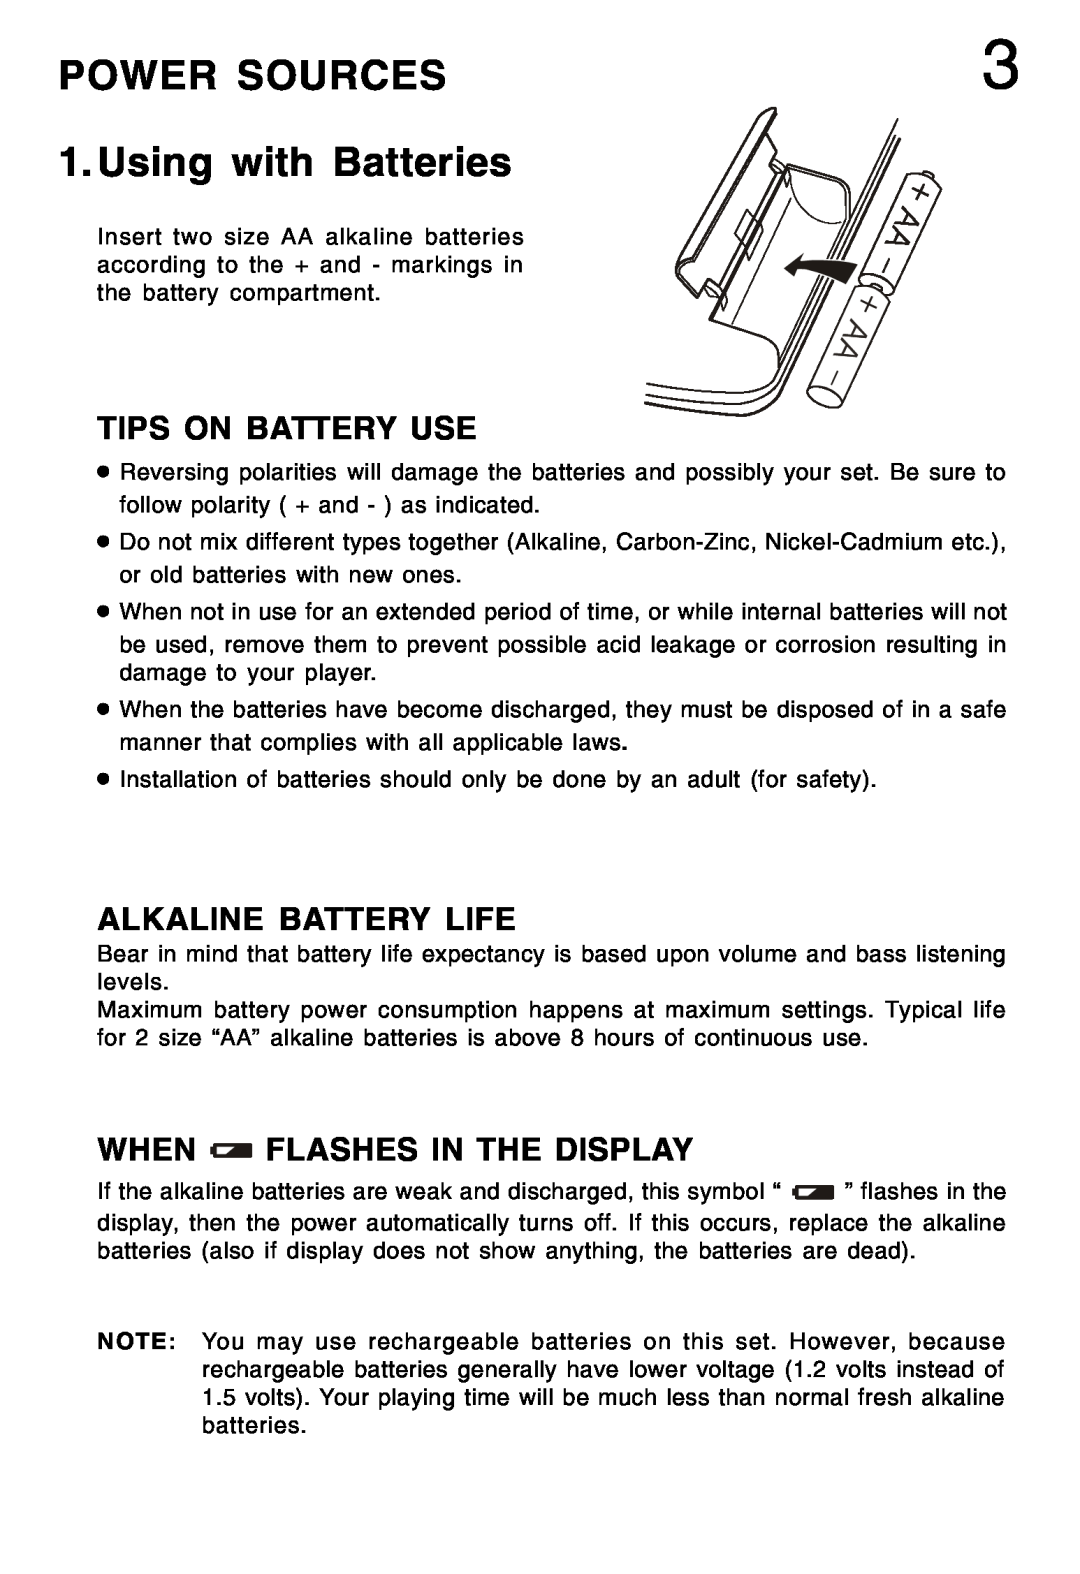 Lenoxx Electronics CD-79 Power Sources, Using with Batteries, Tips On Battery Use, Alkaline Battery Life 